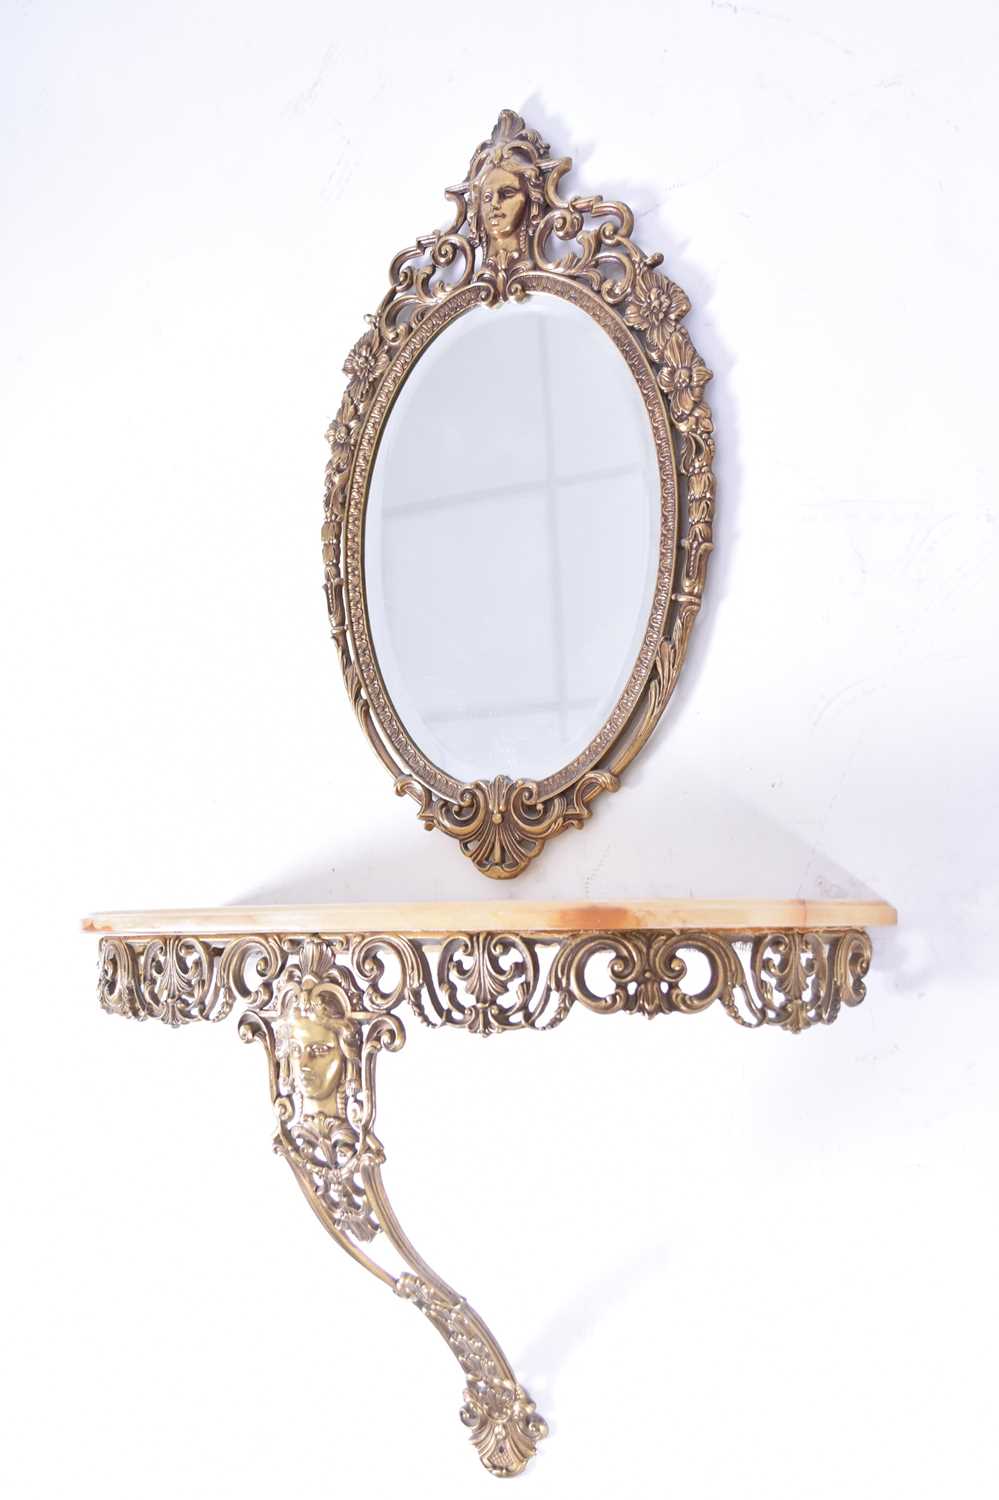 A reproduction gilt brass console table and associated wall mirror - Image 2 of 2